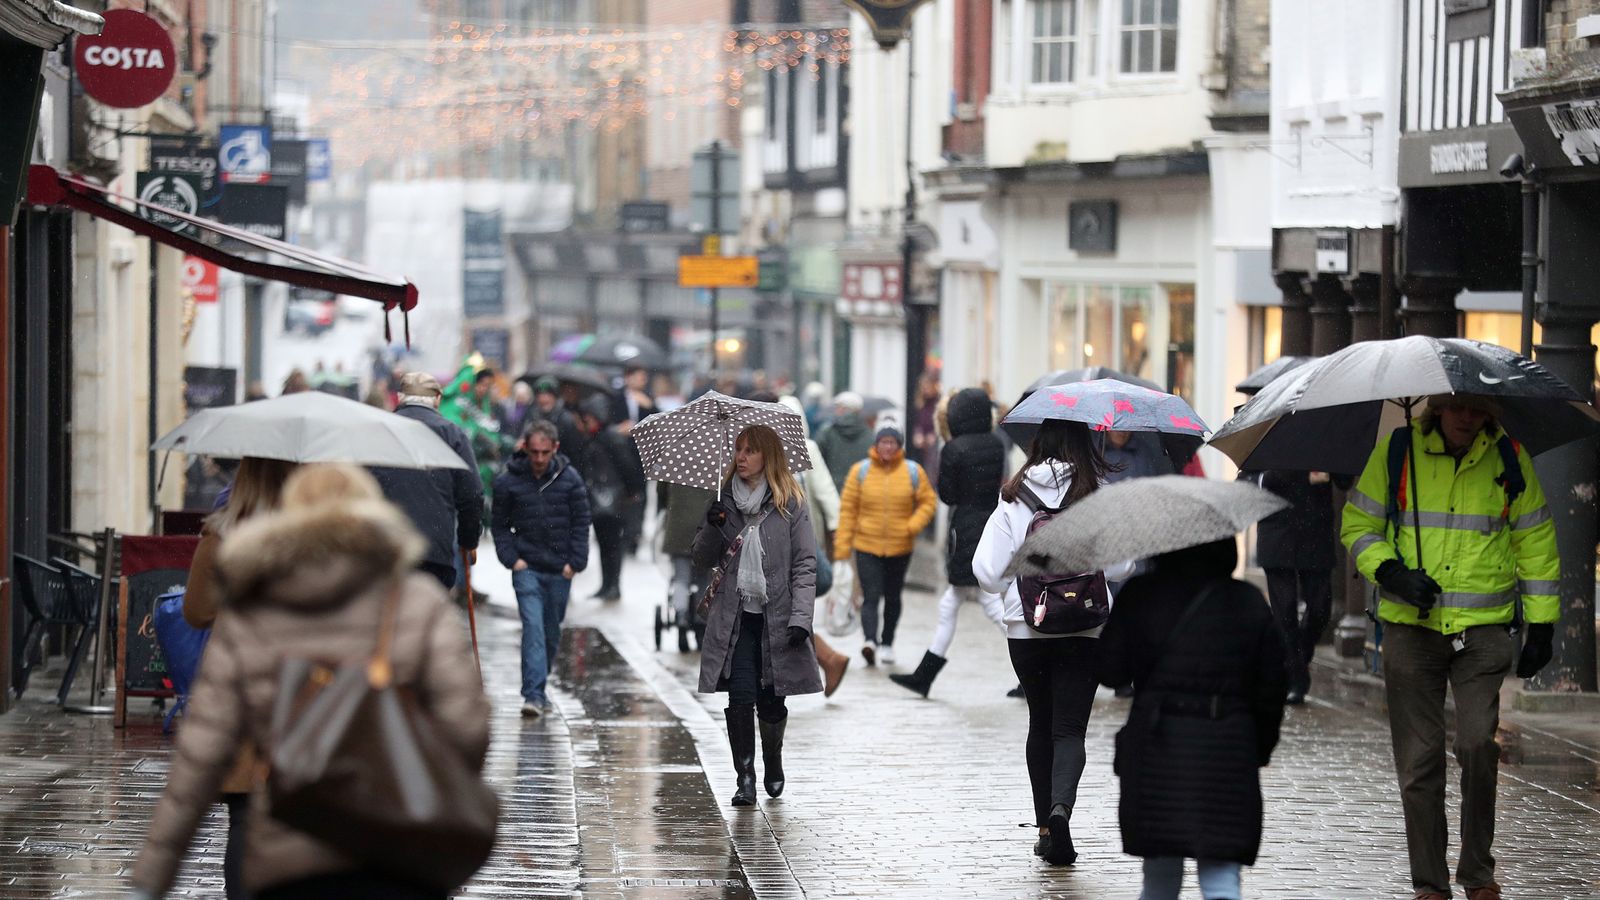 Retail sales ‘at lockdown level’ as poor weather and cost of living pressures weigh | Business News